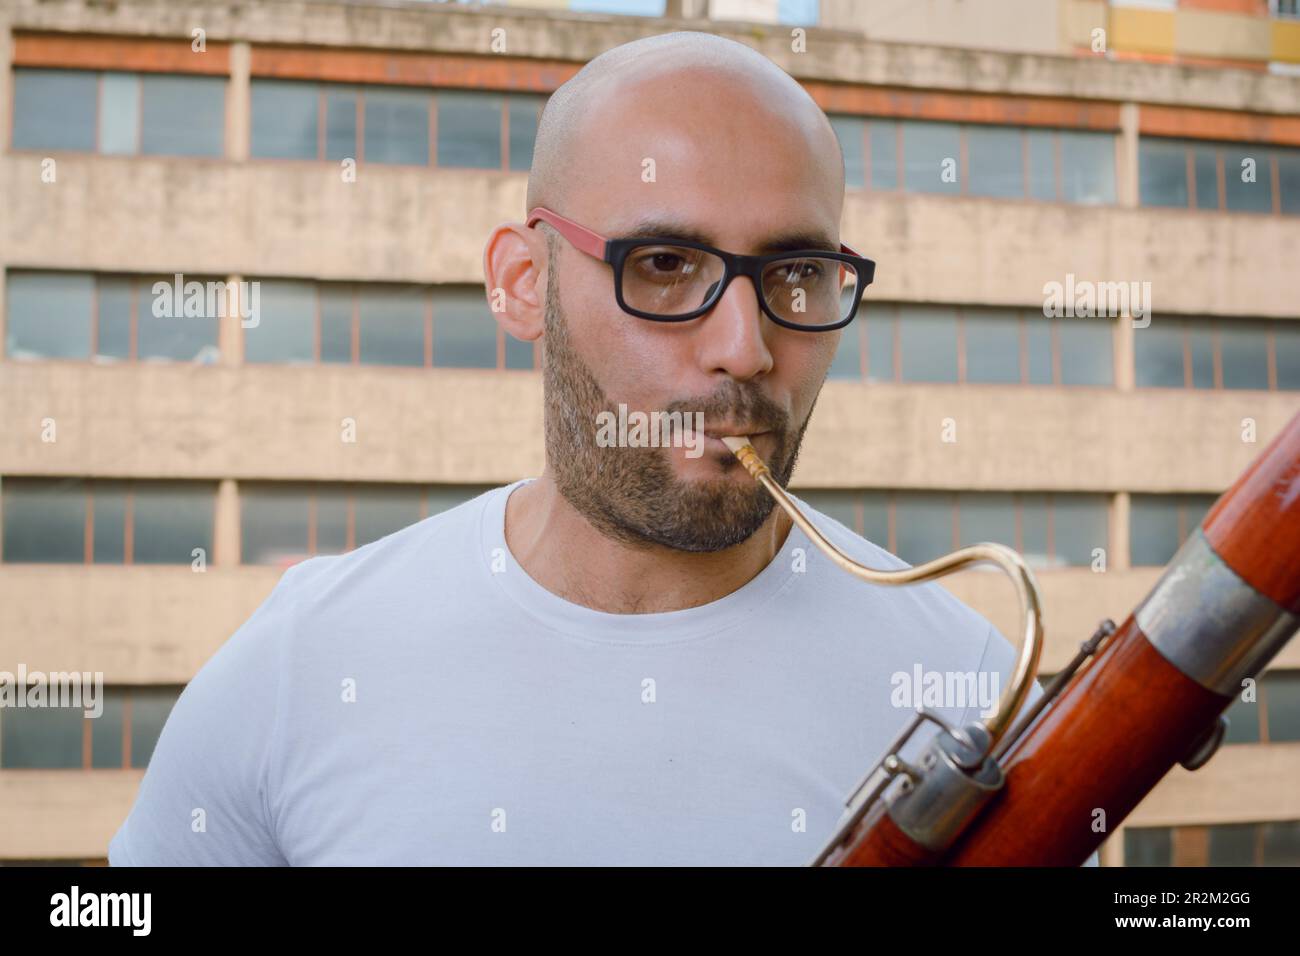 closeup portrait of young latino man with glasses, beard and bald, wearing white t-shirt, standing playing bassoon on apartment balcony with urban bui Stock Photo